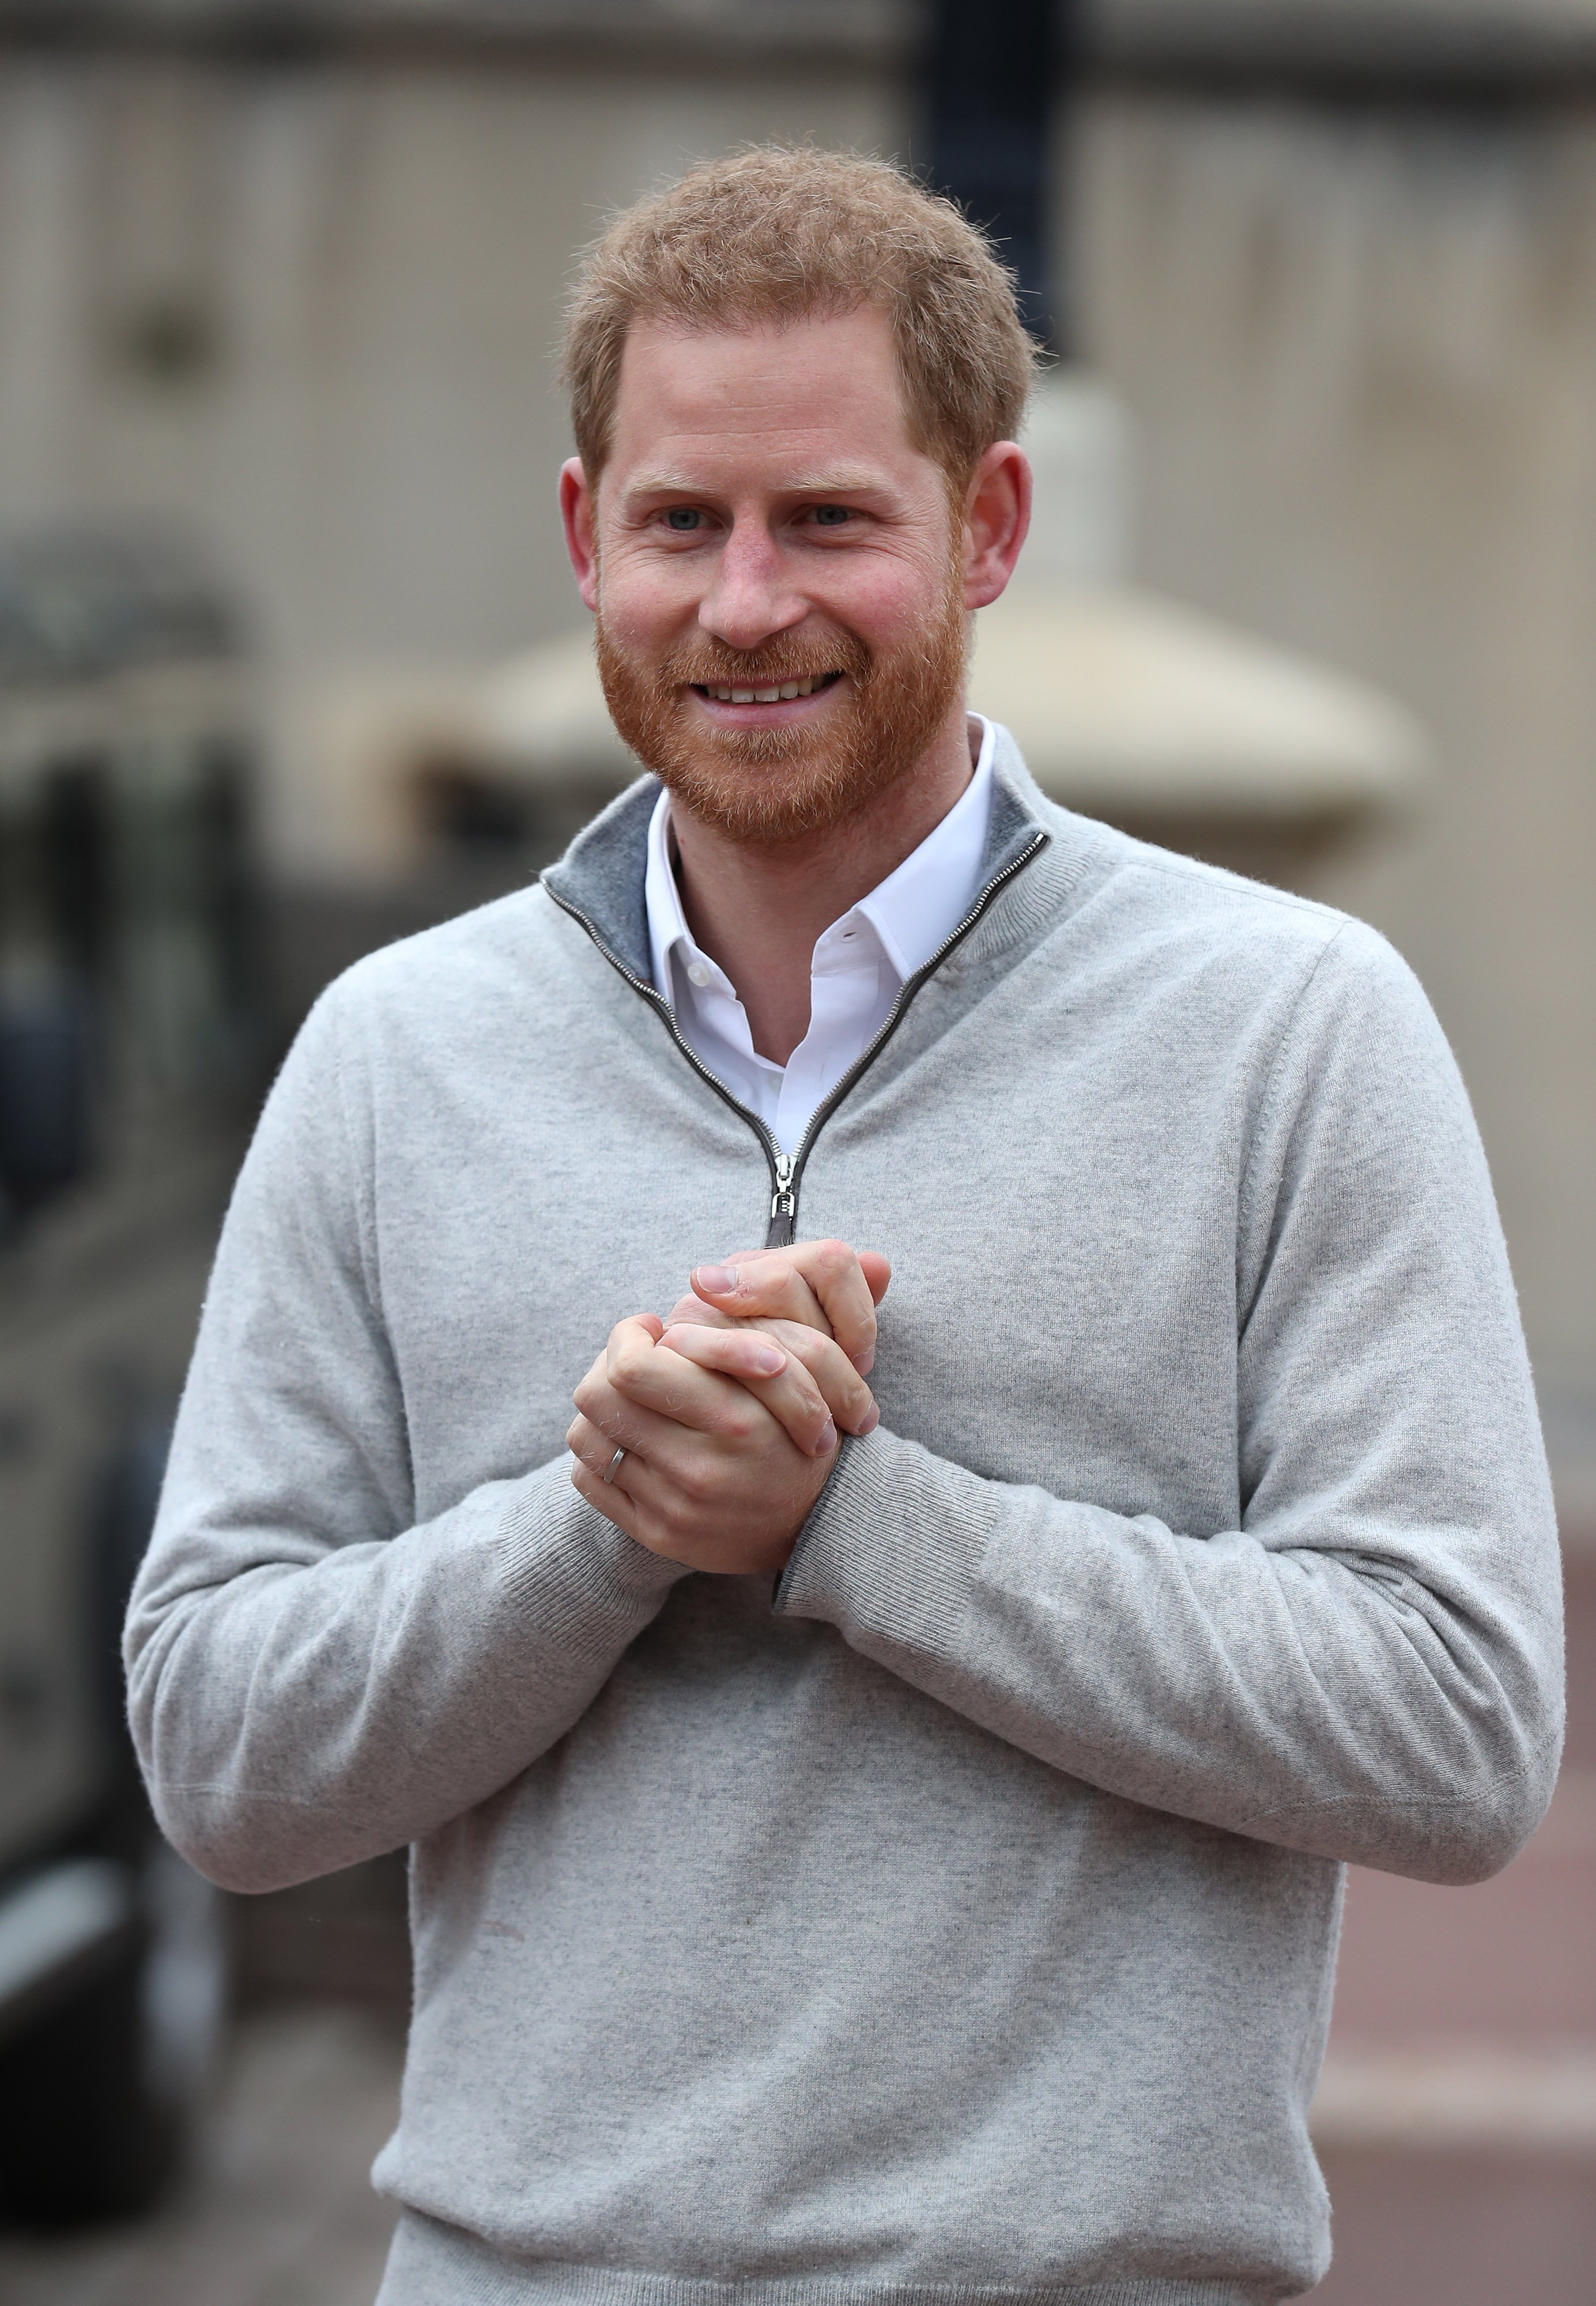 Prince Harry, the Duke of Sussex, offers a subtle smile | Source: Photo: Getty Images